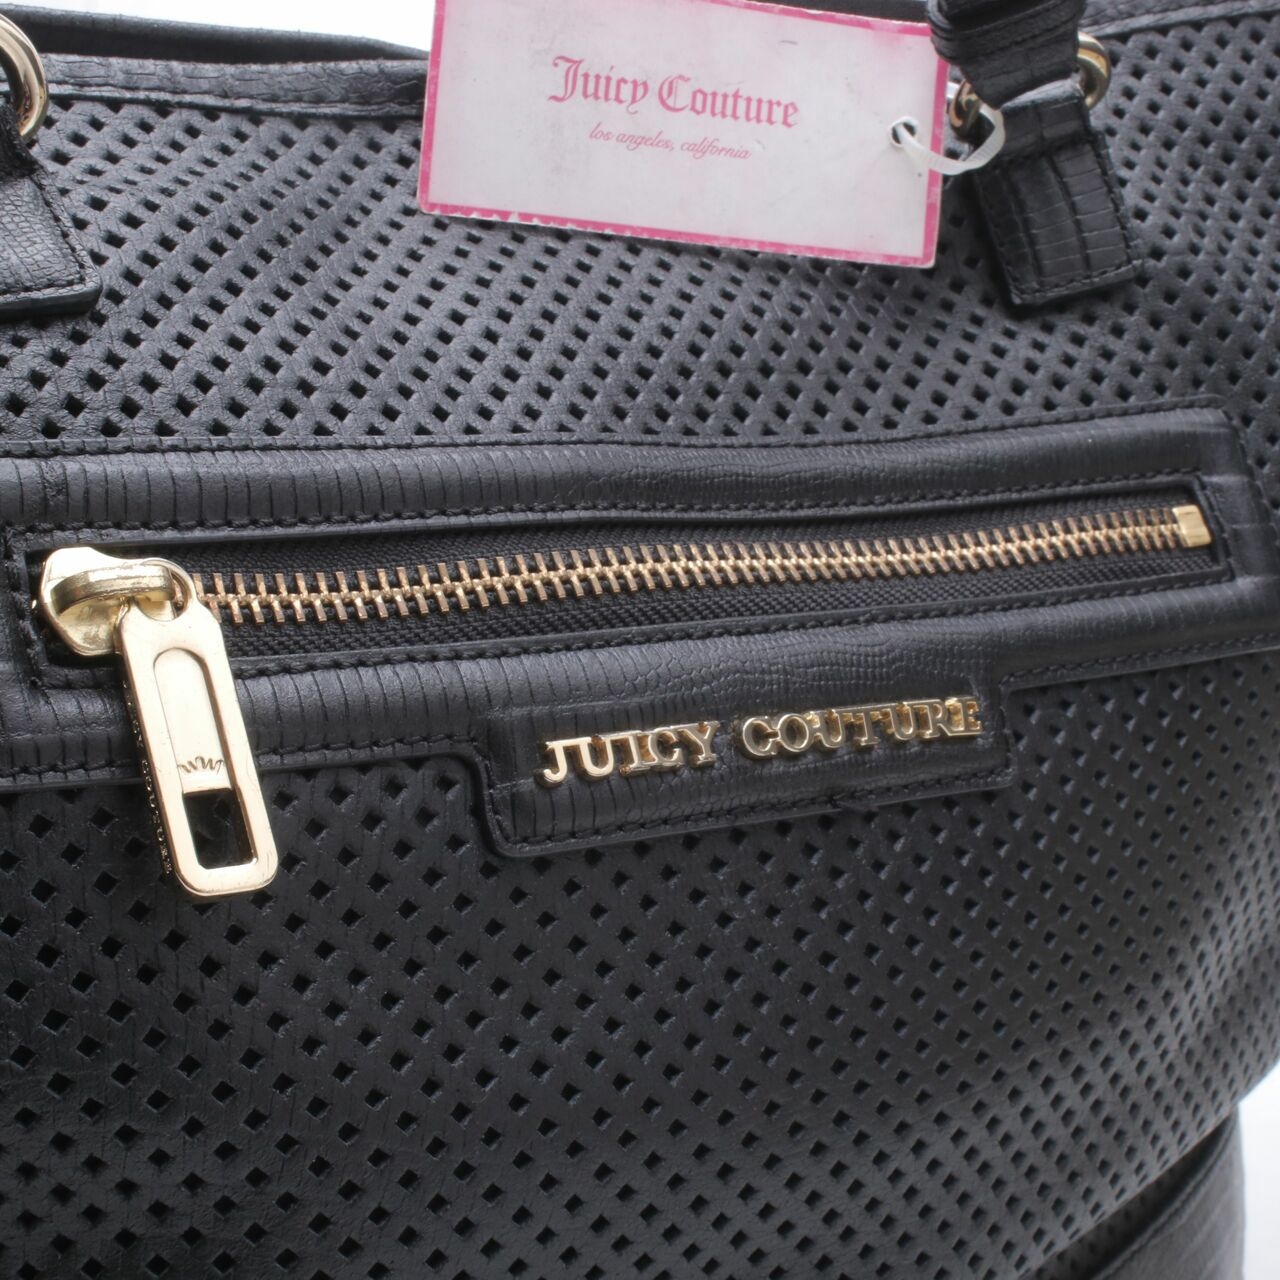 Juicy Couture Black Perforated Shopping Tote Bag